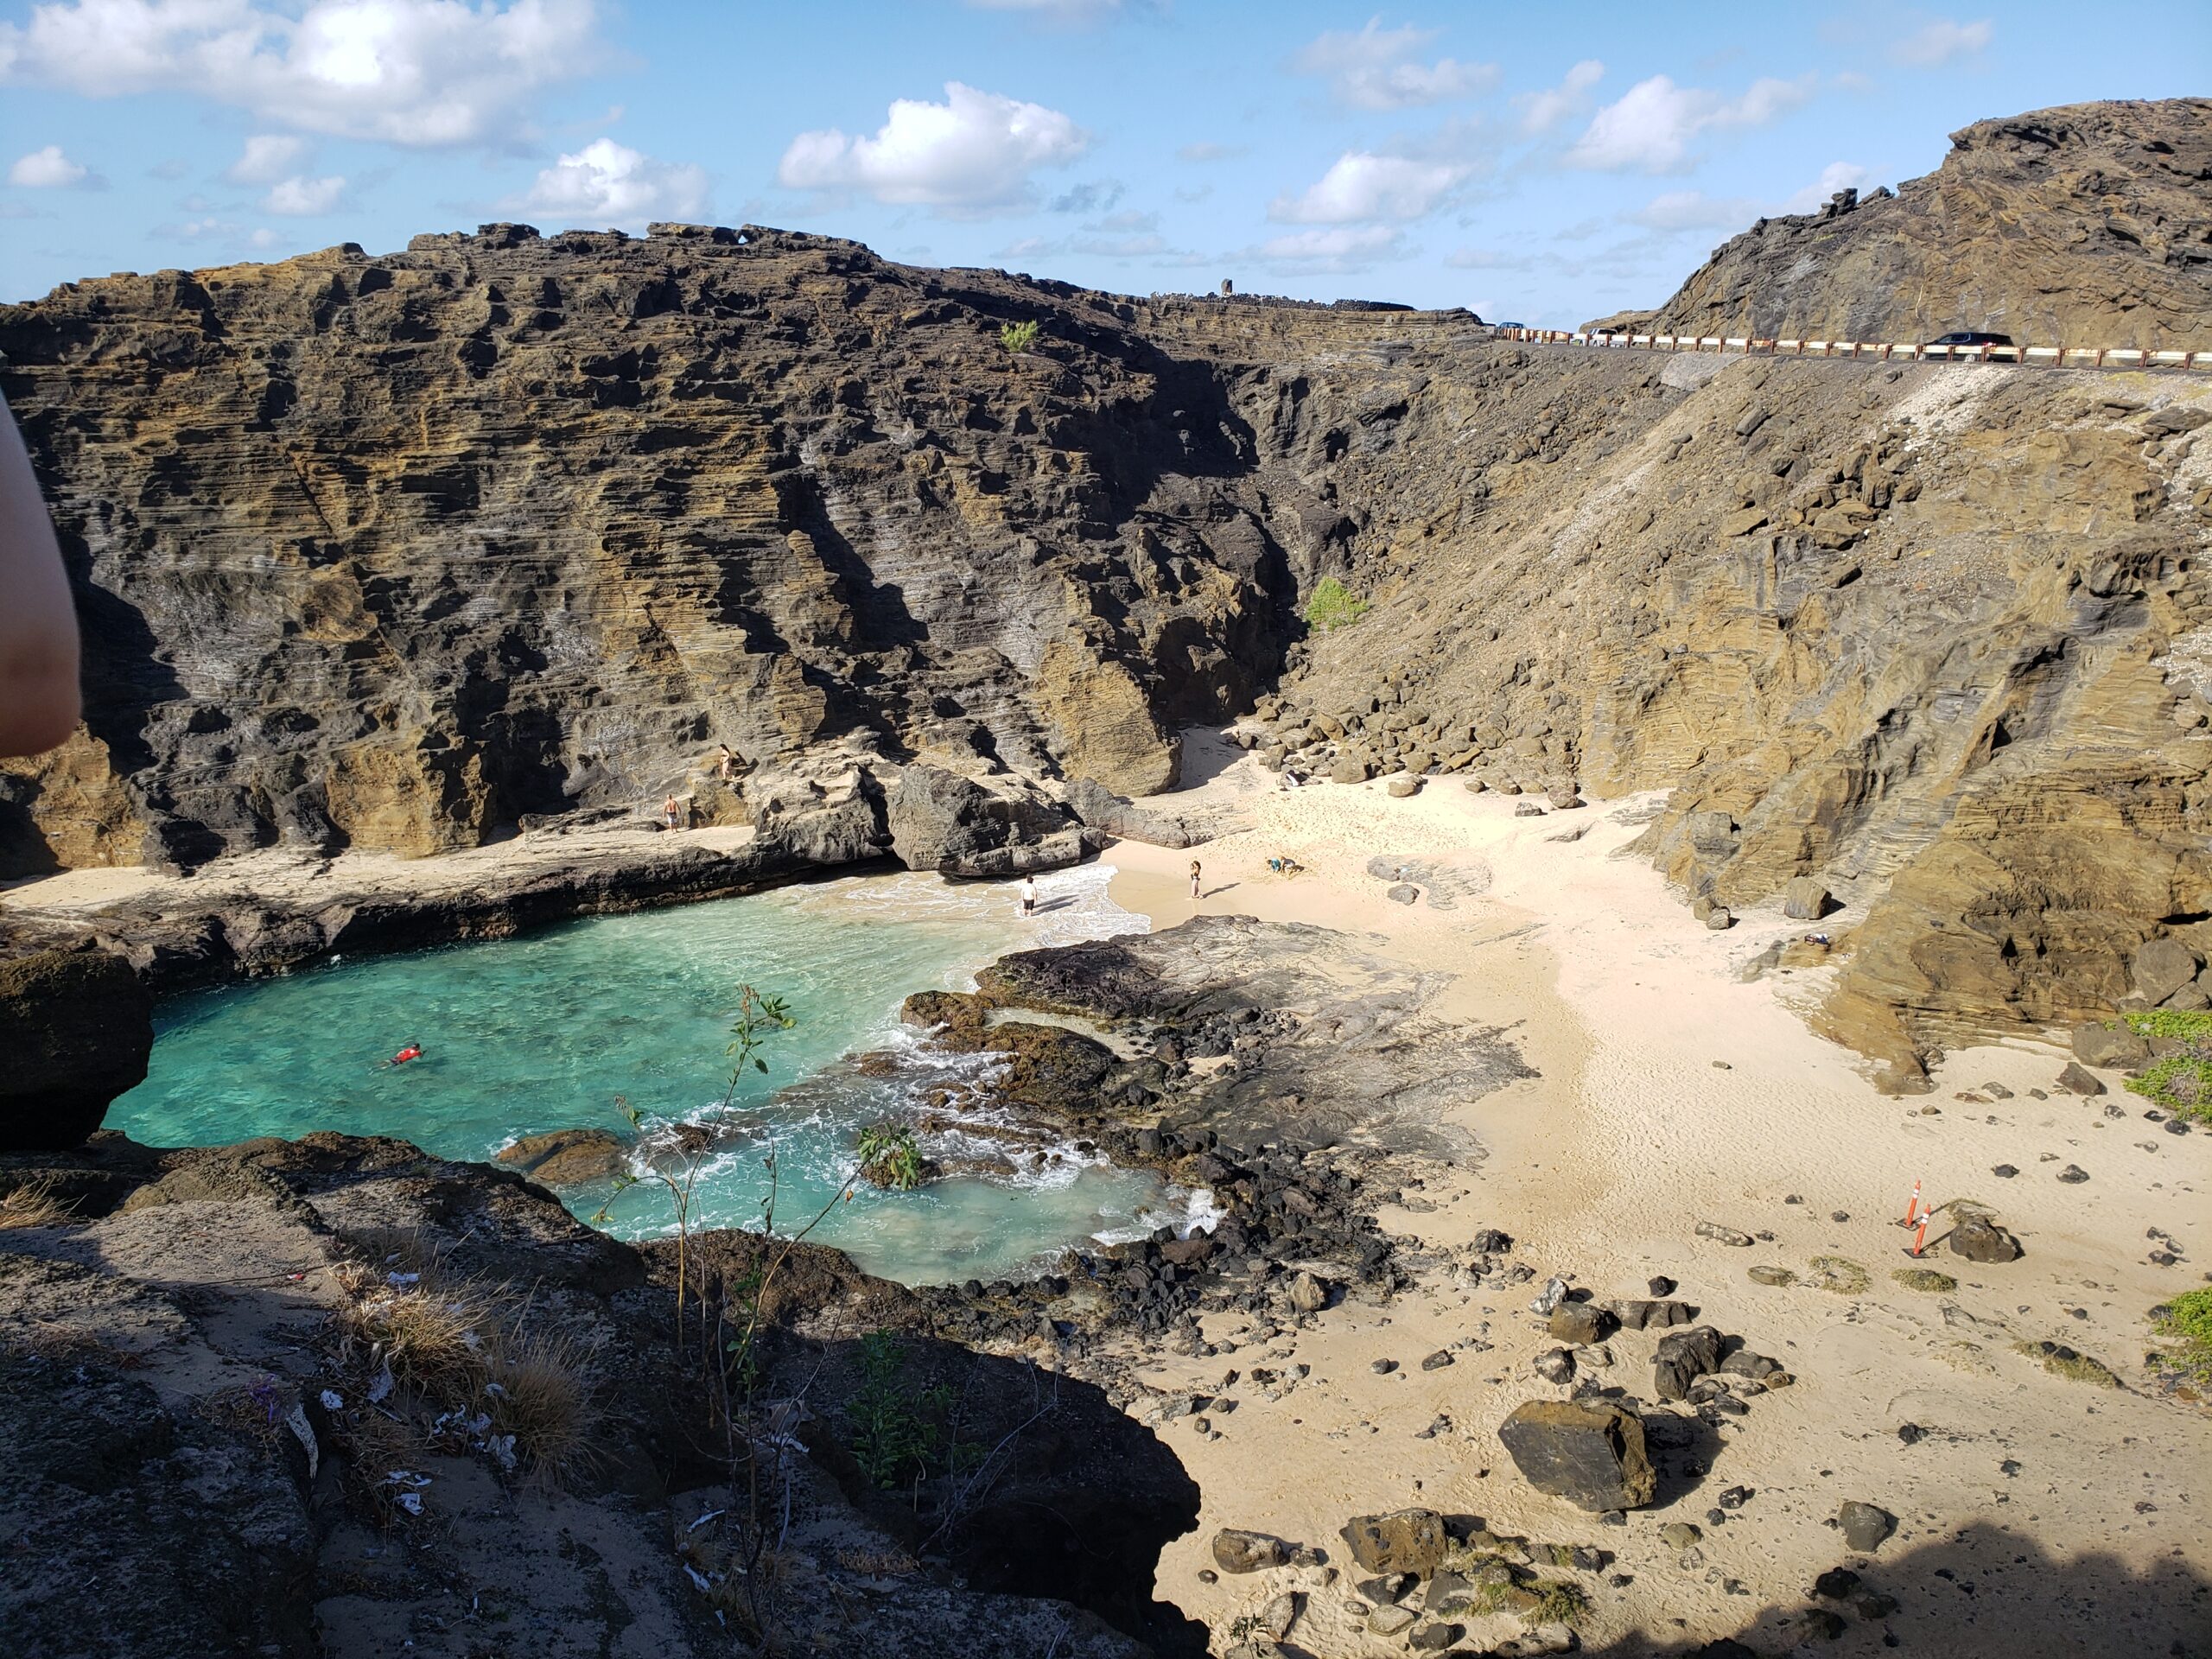 The secret Beach at the Halona Blowhole.